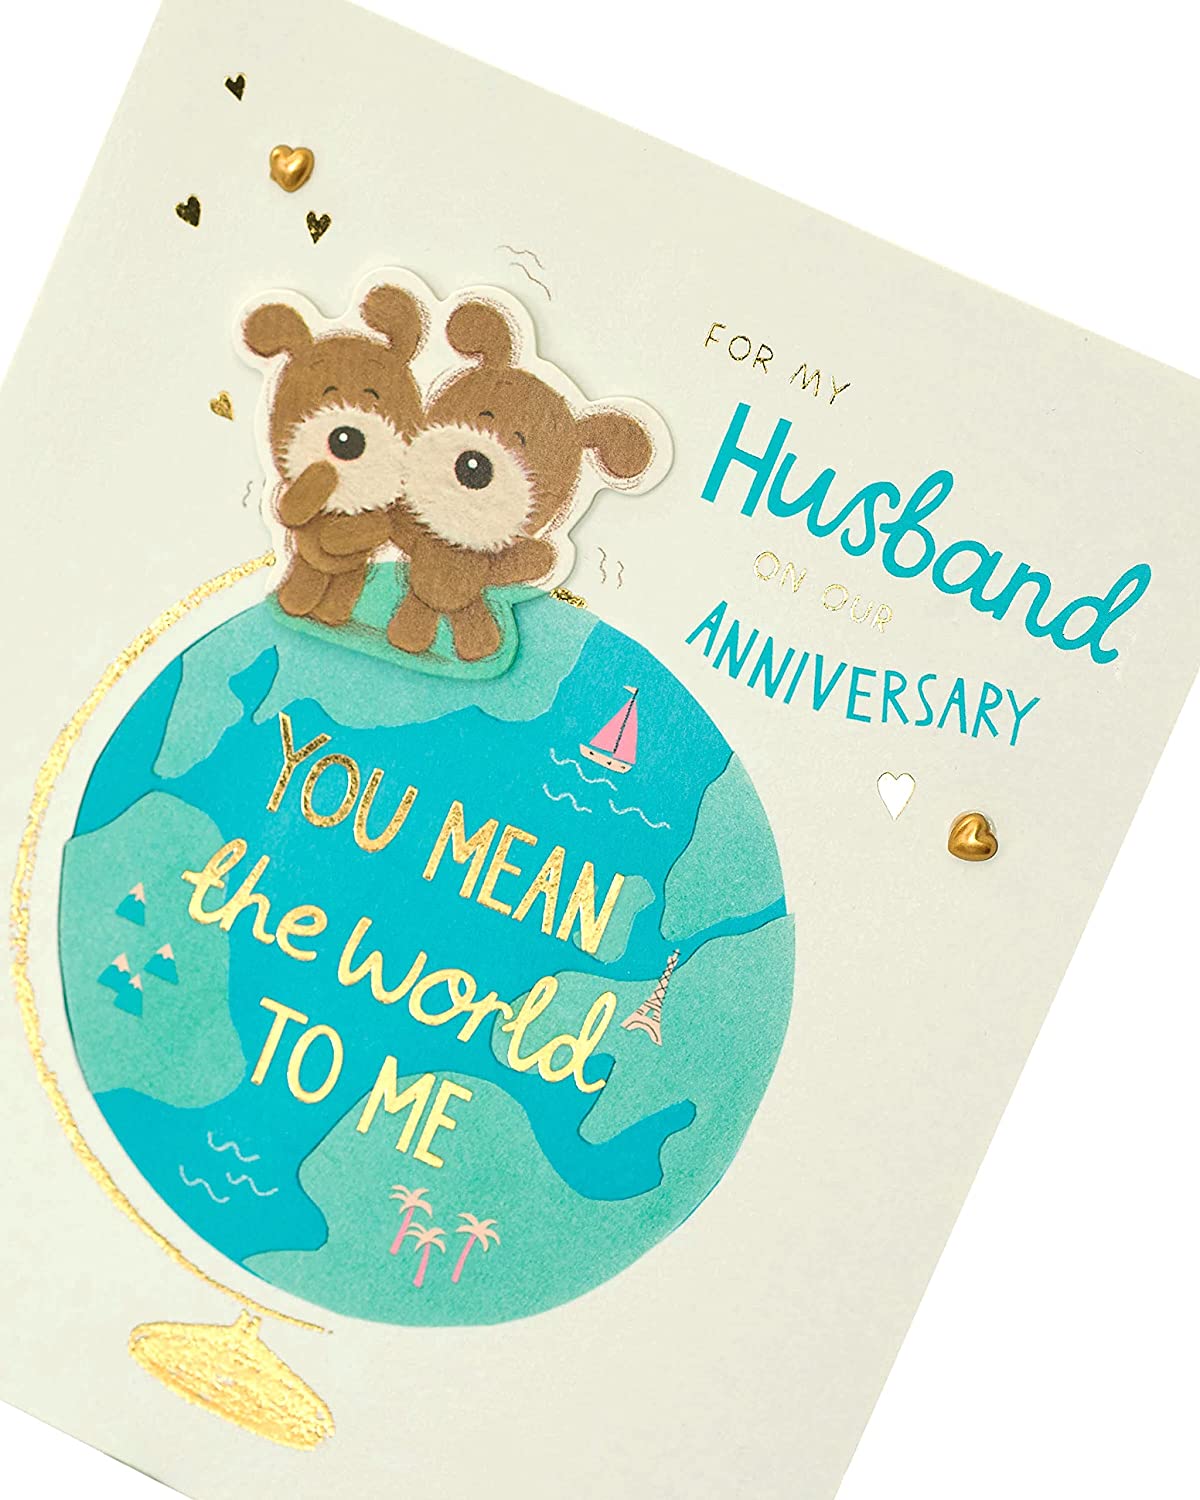 happy anniversary to my husband cards